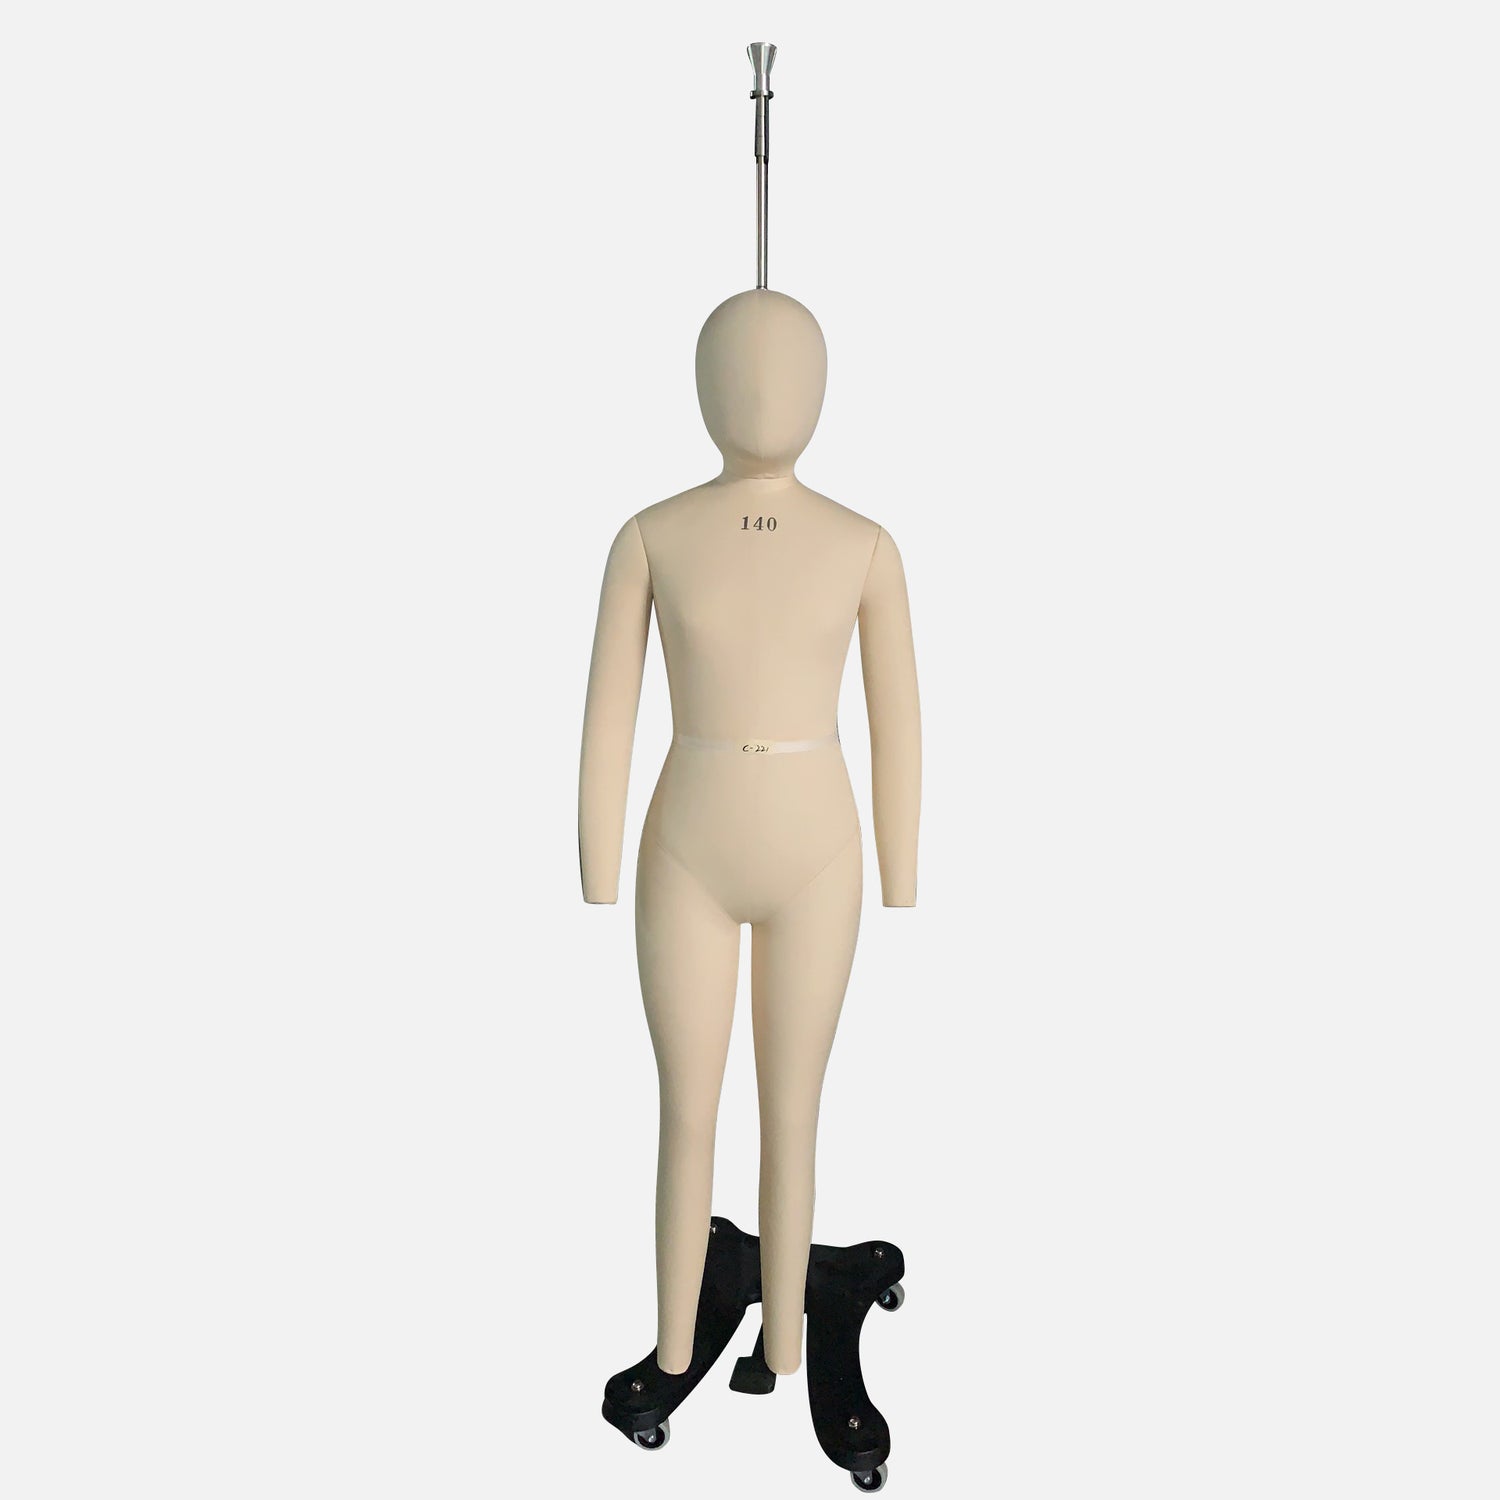 Children Full Body Mannequin, Boy 8 Years Old Kid Tailor Model for Design Sewing,Child Dress Form with Hanger Base DE-LIANG